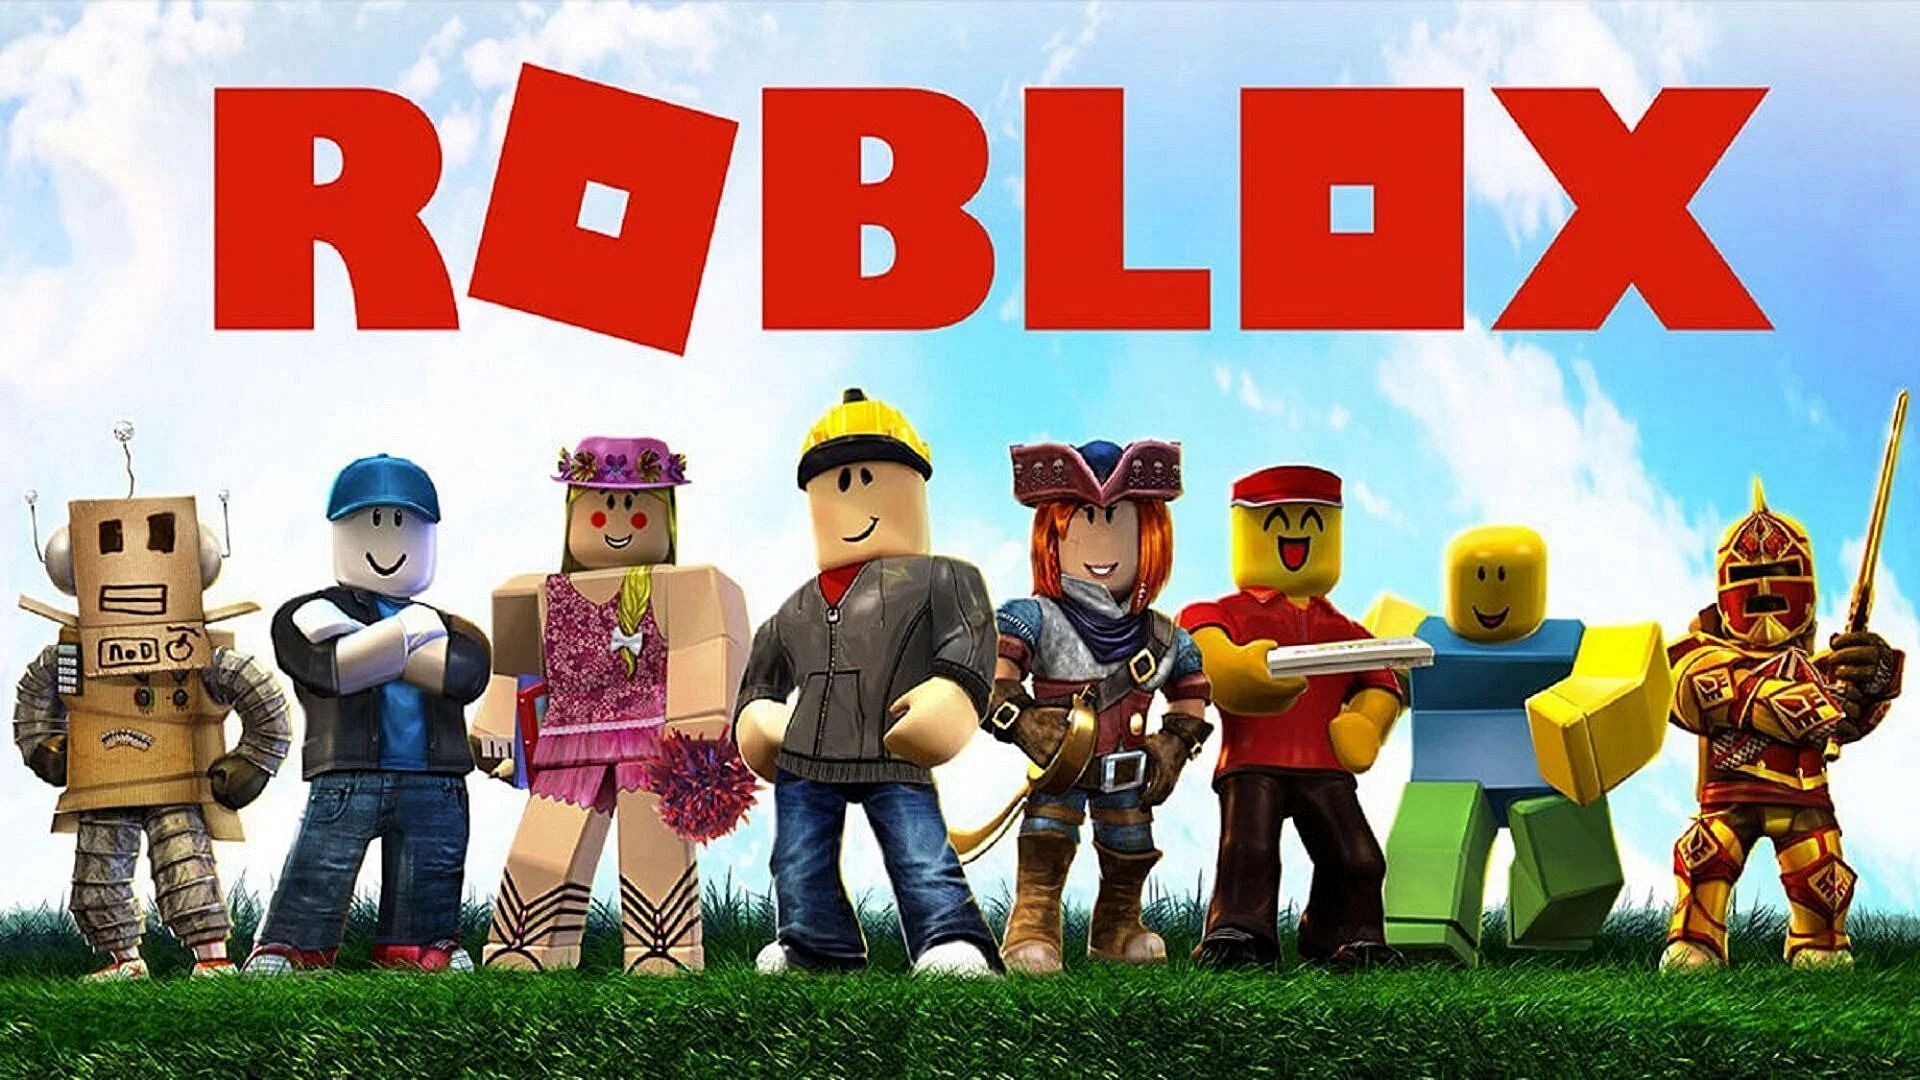 Enjoy these new amazing top 5 Roblox games (Image via Roblox)